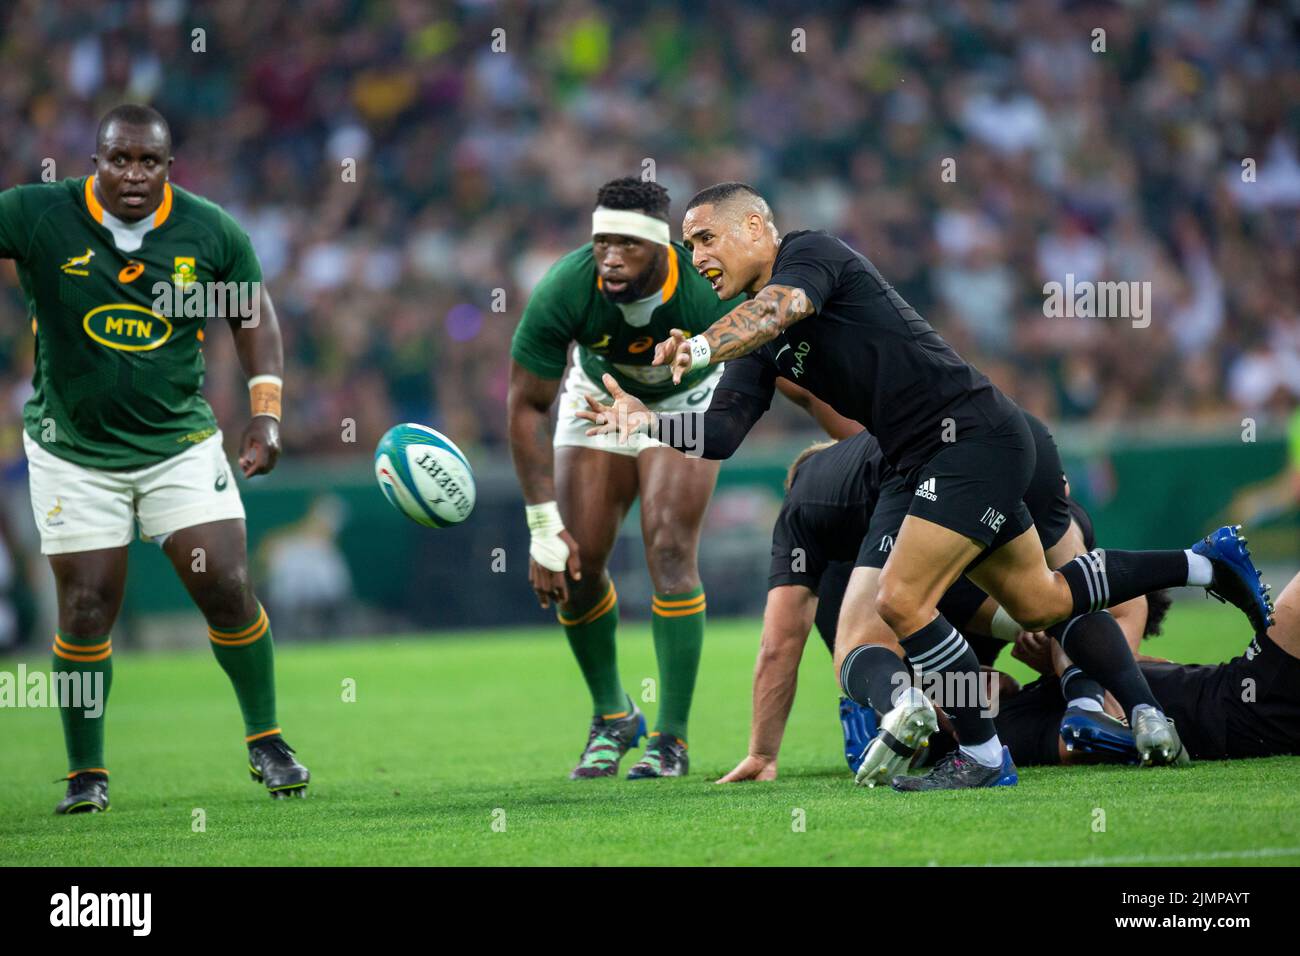 Mbombela, Nelspruit, South Africa. 6th August, 2022. Aaron Smith passes the ball with Kolisi and Trevor Nyakane looking on during the Rugby Championship international match between South Africa and New Zealand at the Mbombela Stadium on 6 August 2020 Credit: AfriPics.com/Alamy Live News Stock Photo